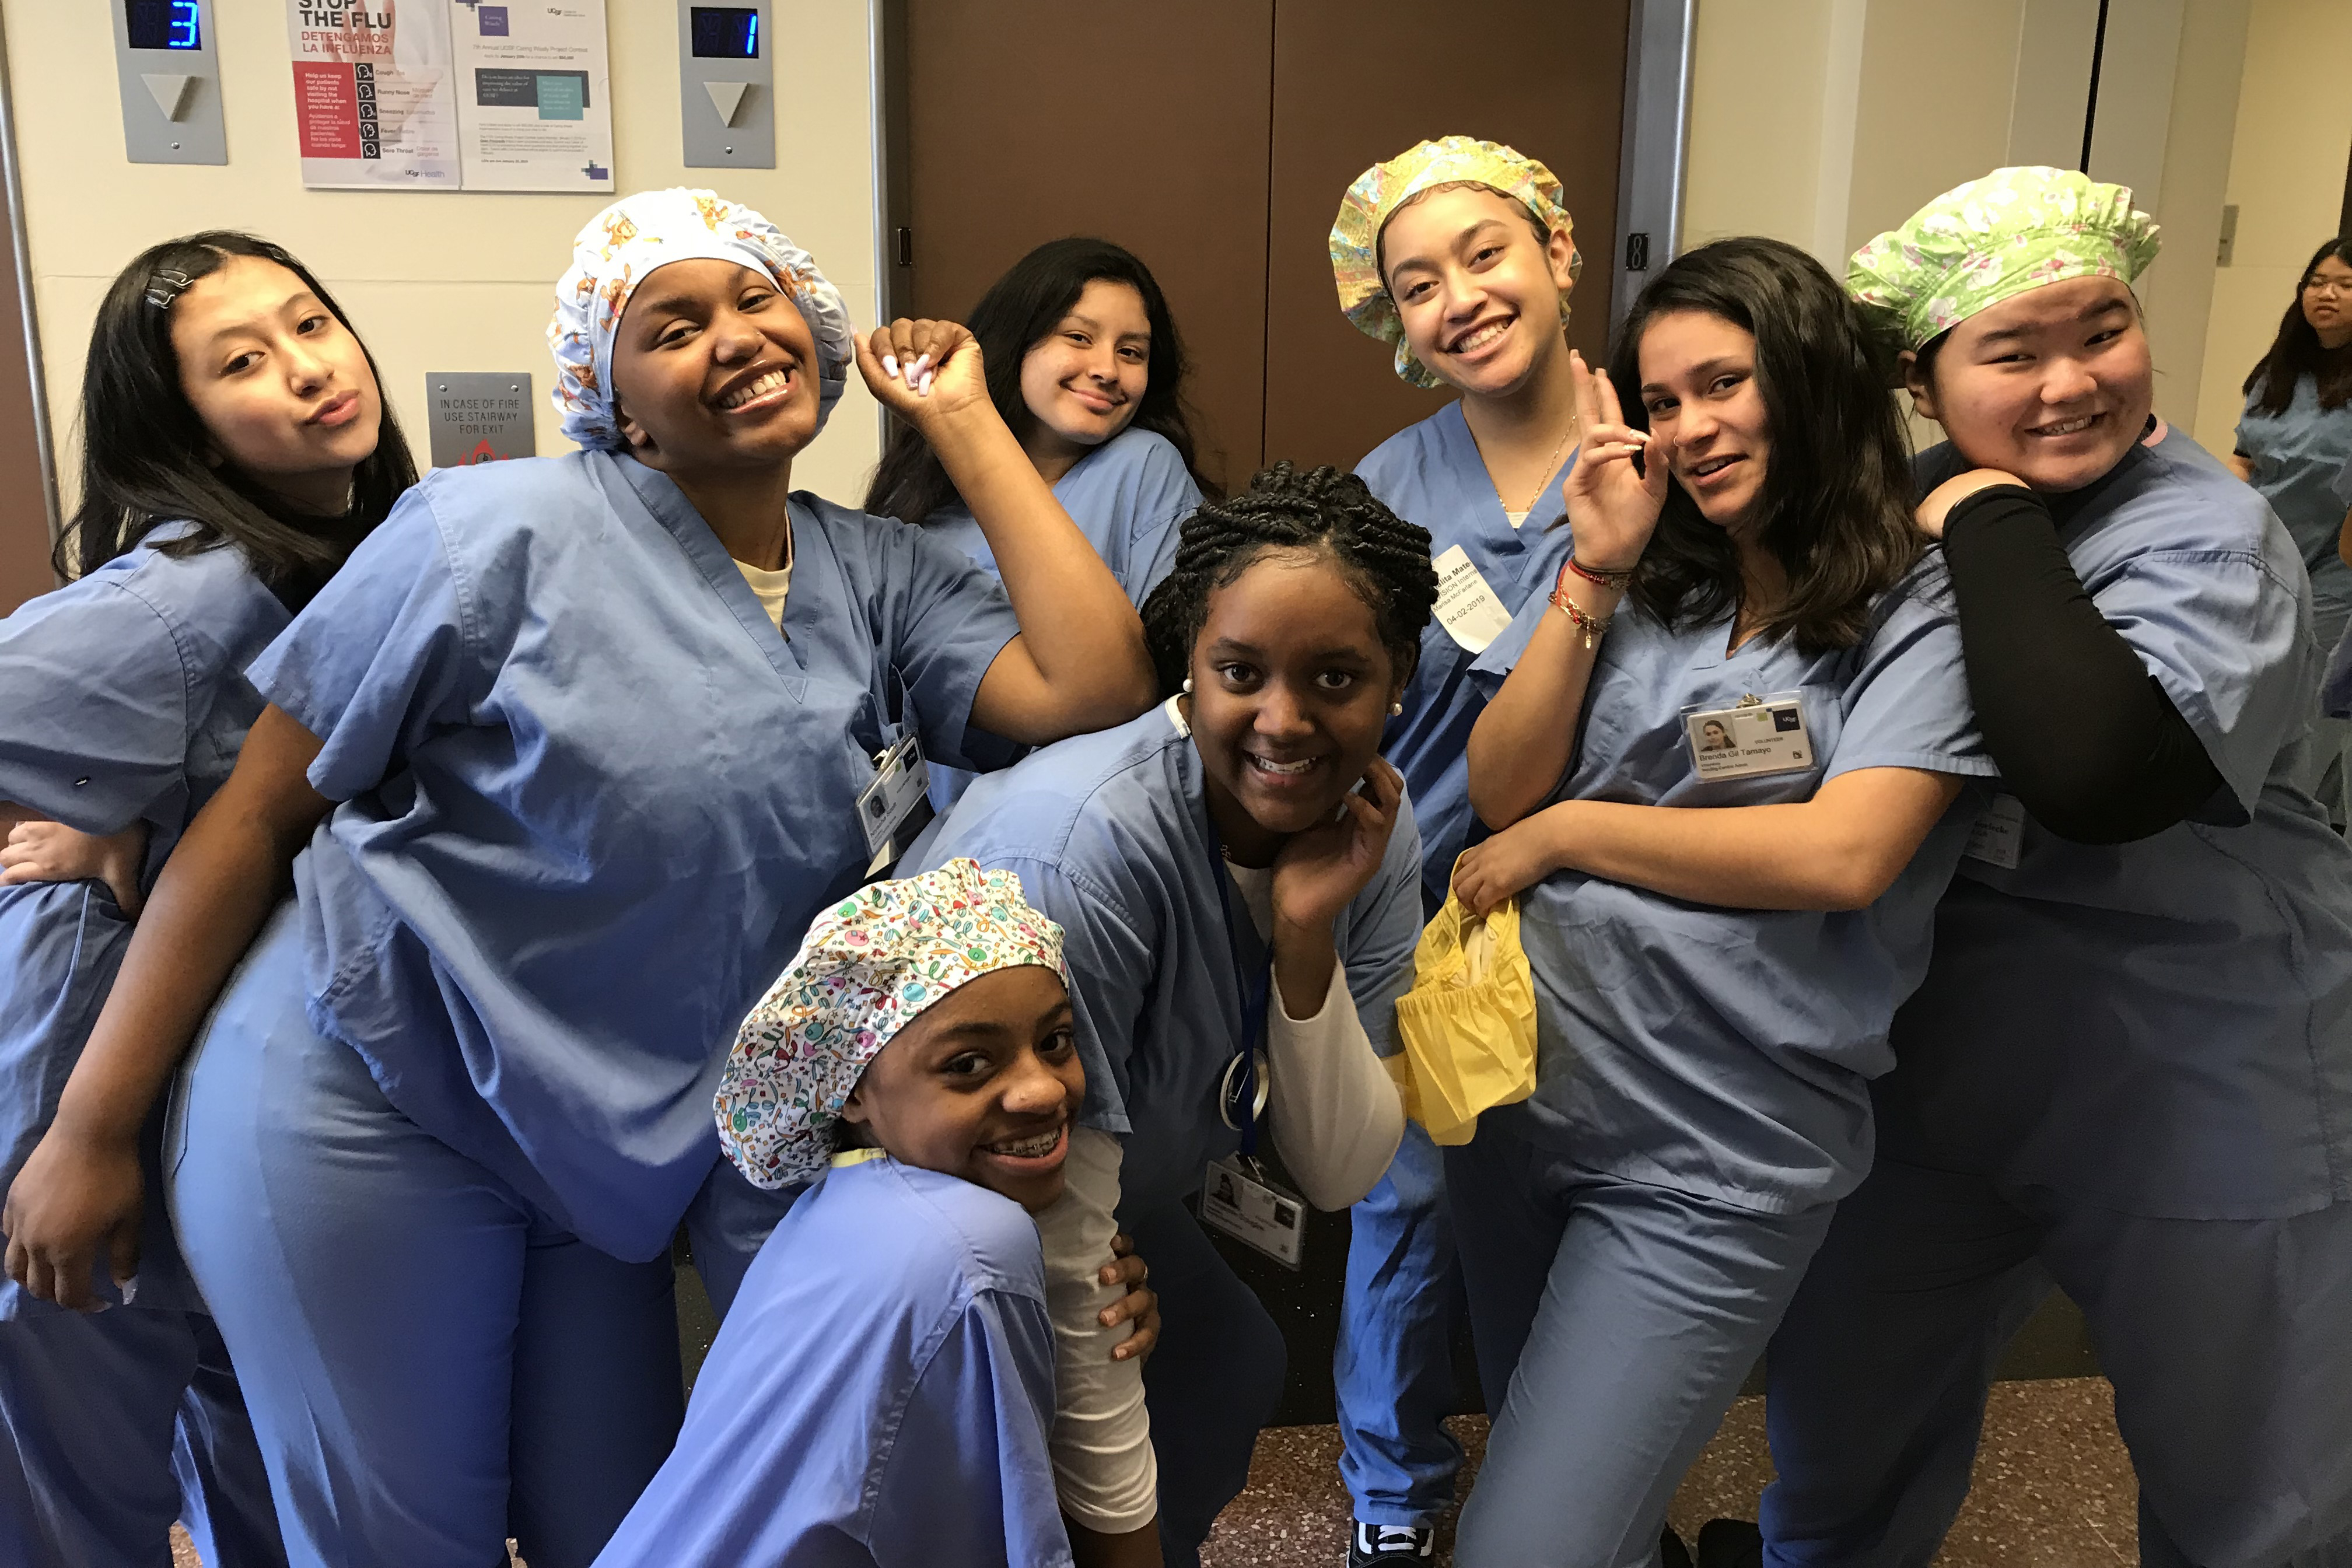 A group of young women in hospital scrubs